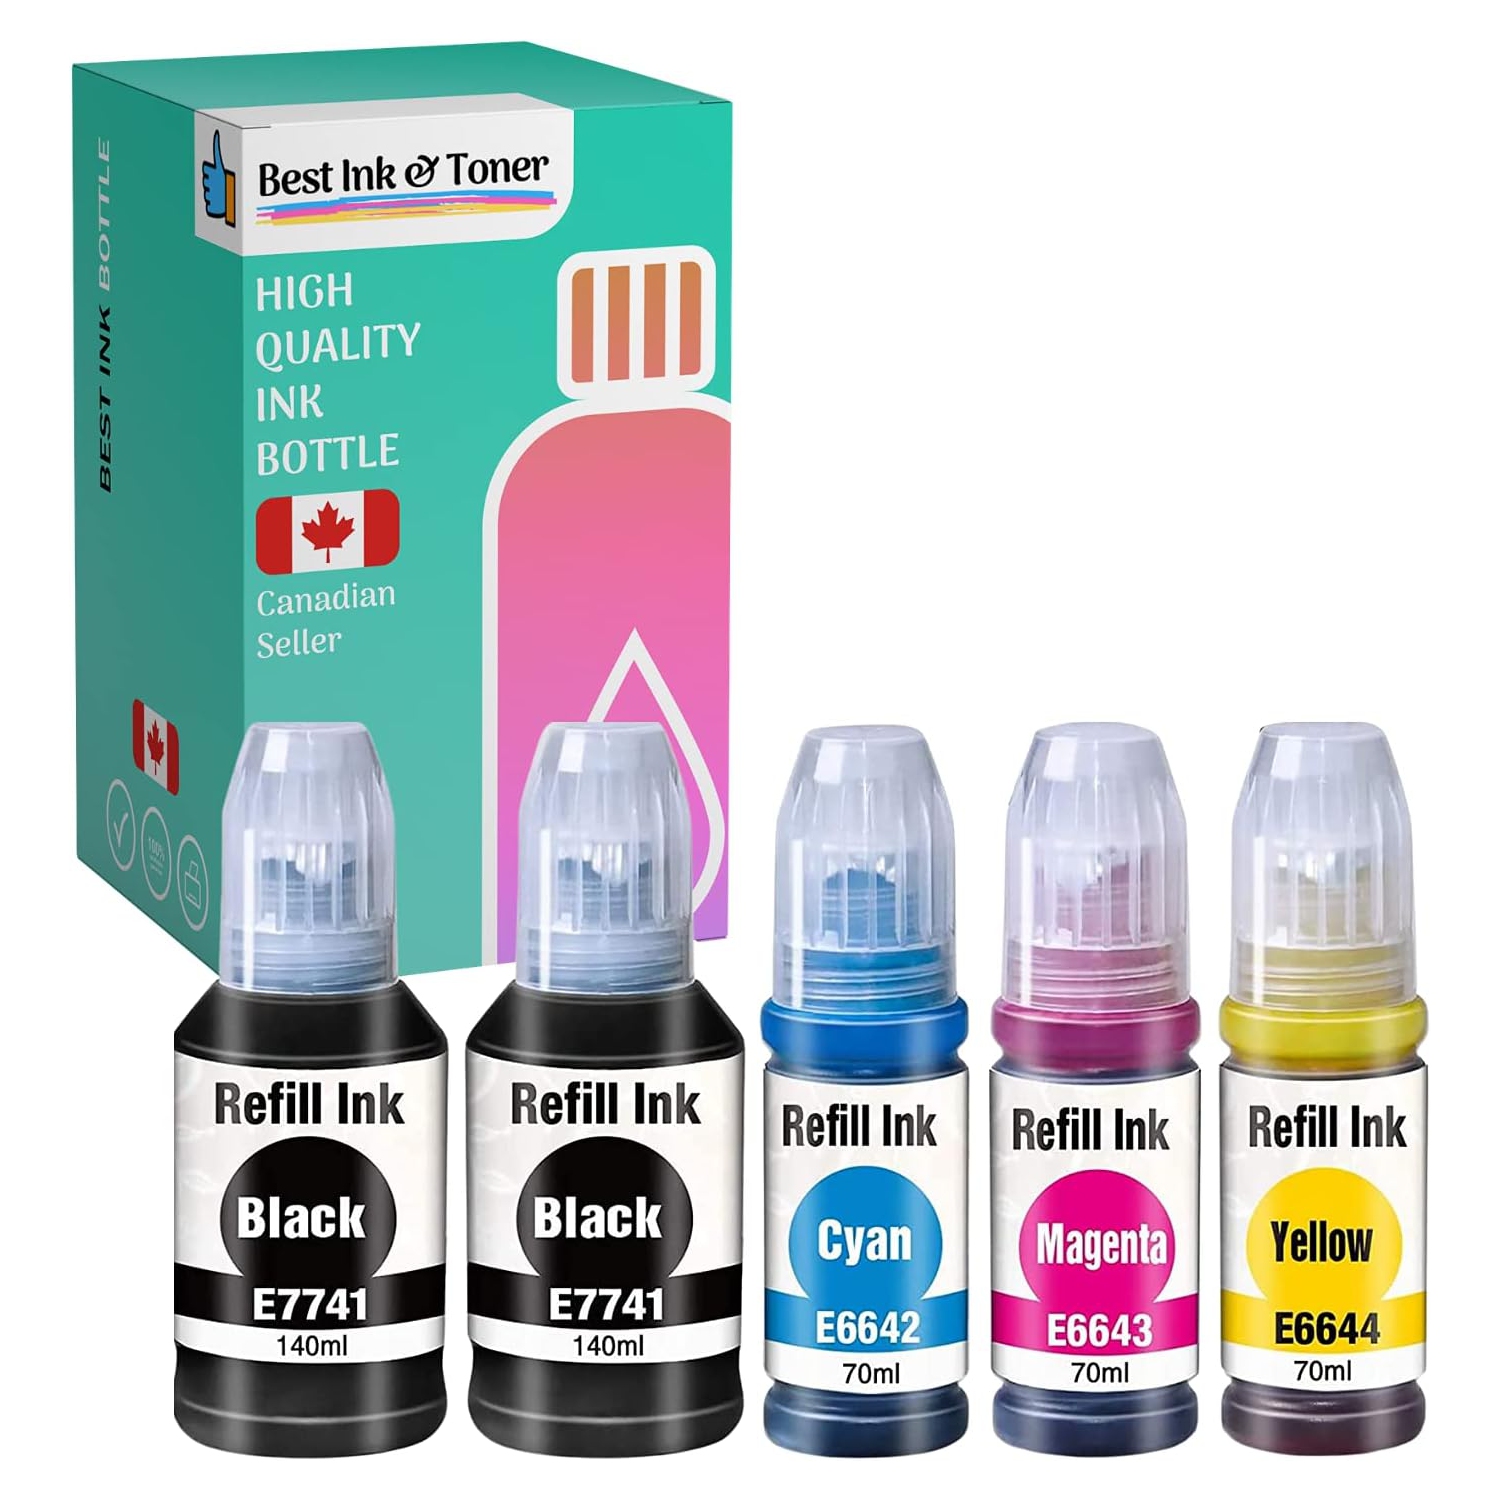 Bestink Compatible Ink Bottle Replacements for 774 & 664 (2 Black, 1 Cyan, 1 Magenta, 1 Yellow, 5-Pack) T774, T664 for use in Expression ET-3600, Workforce Series ET-16500,ET-4550